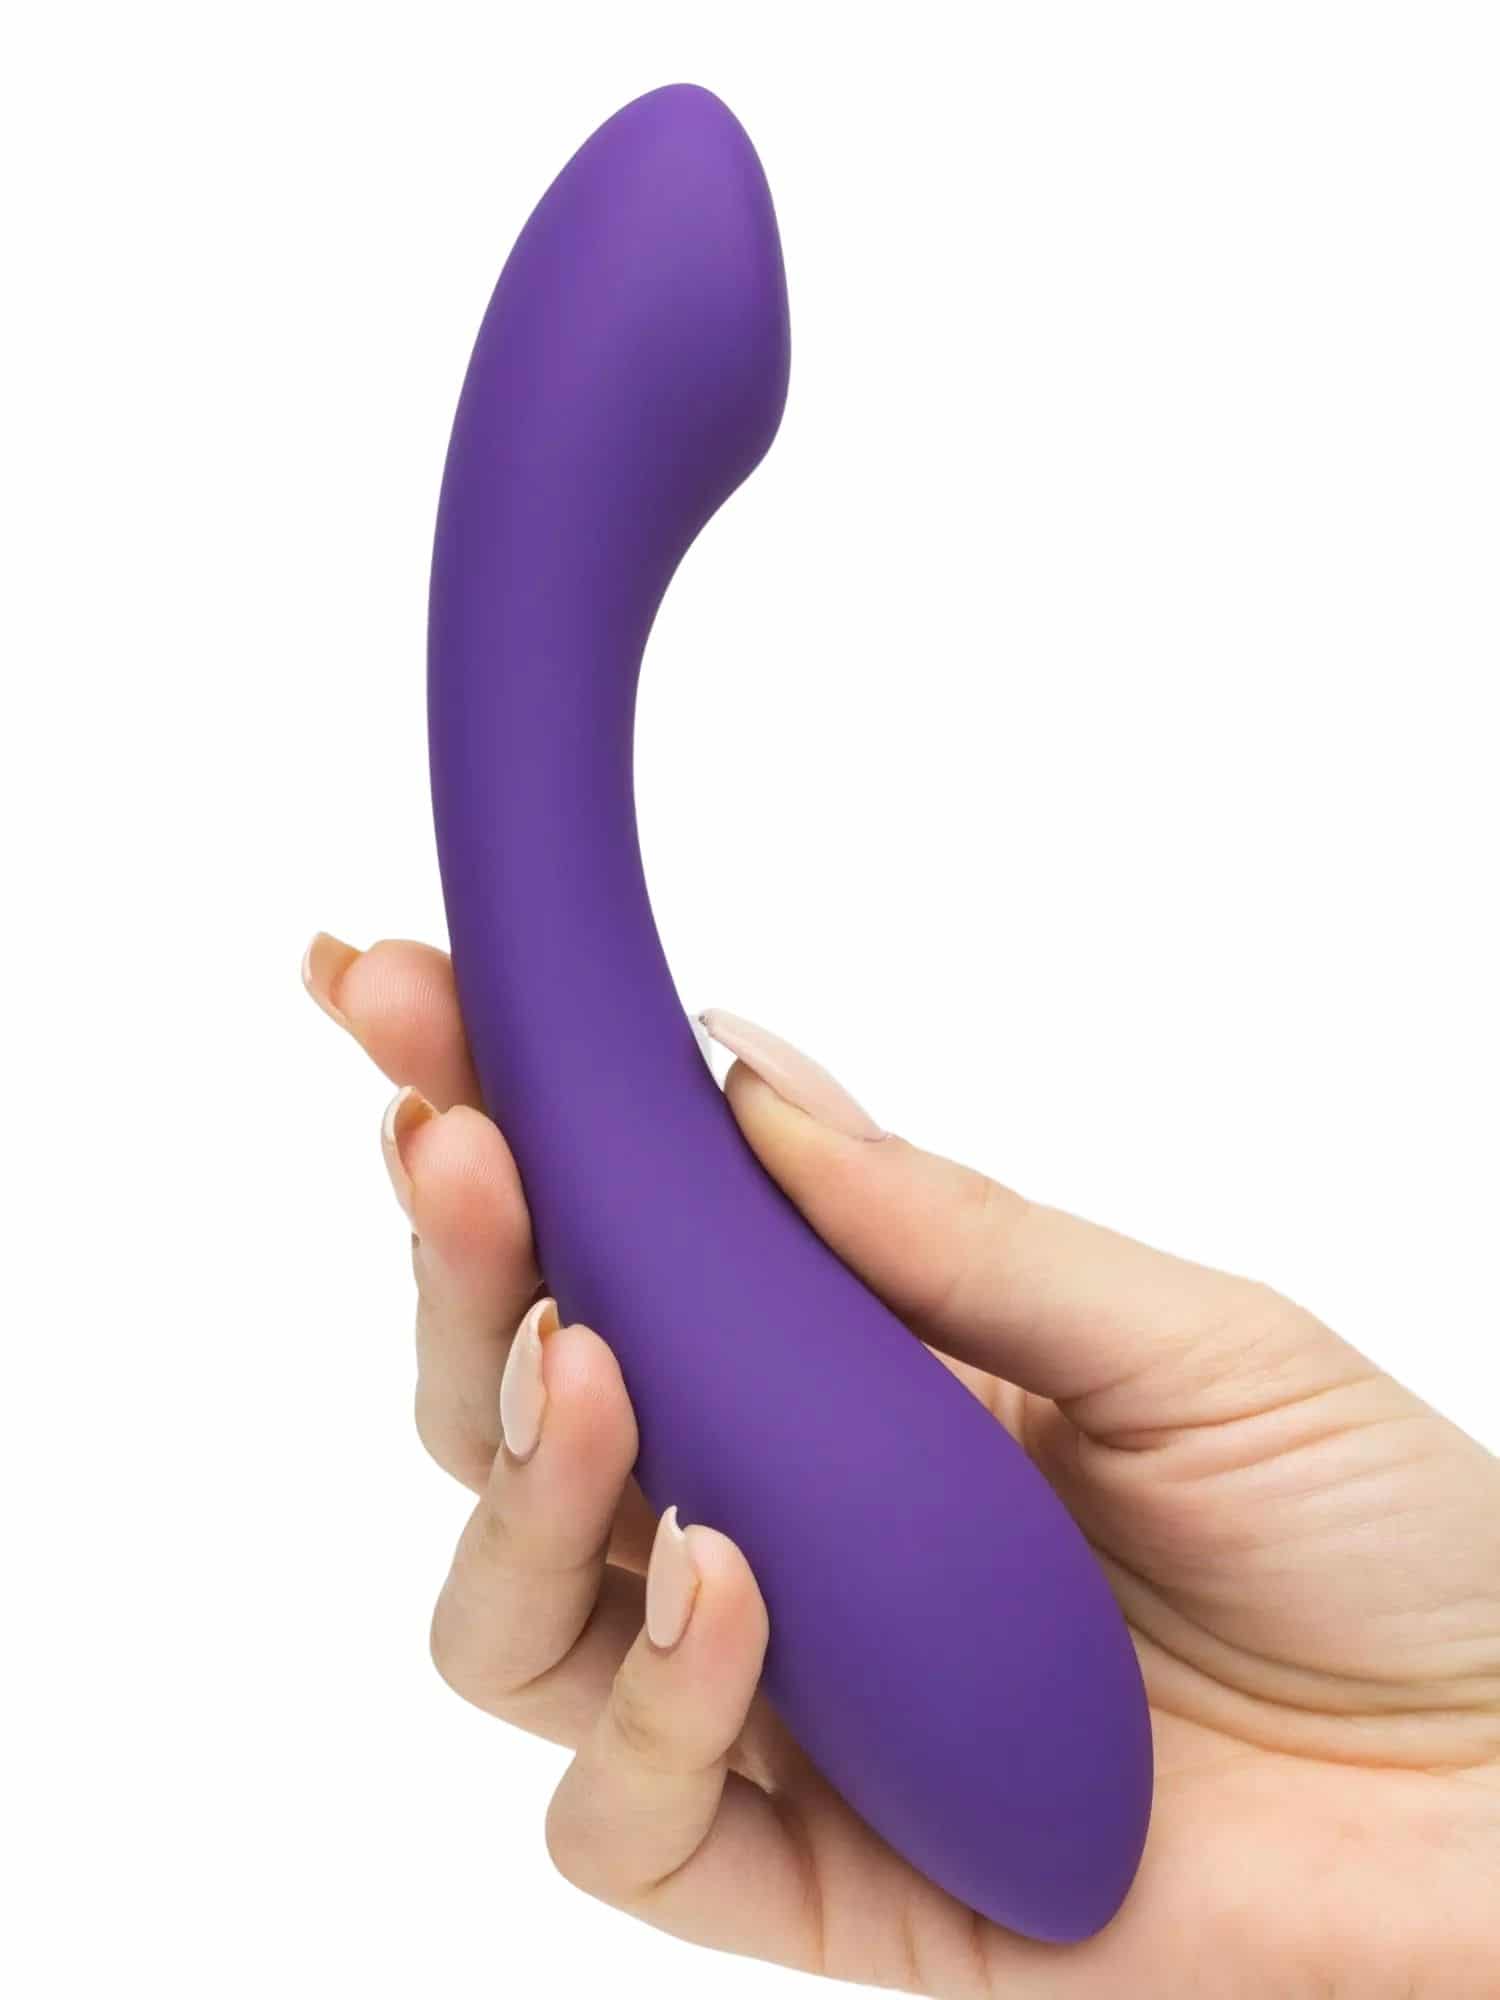 Desire Weighted Curved Double Ended Dildo. Slide 2